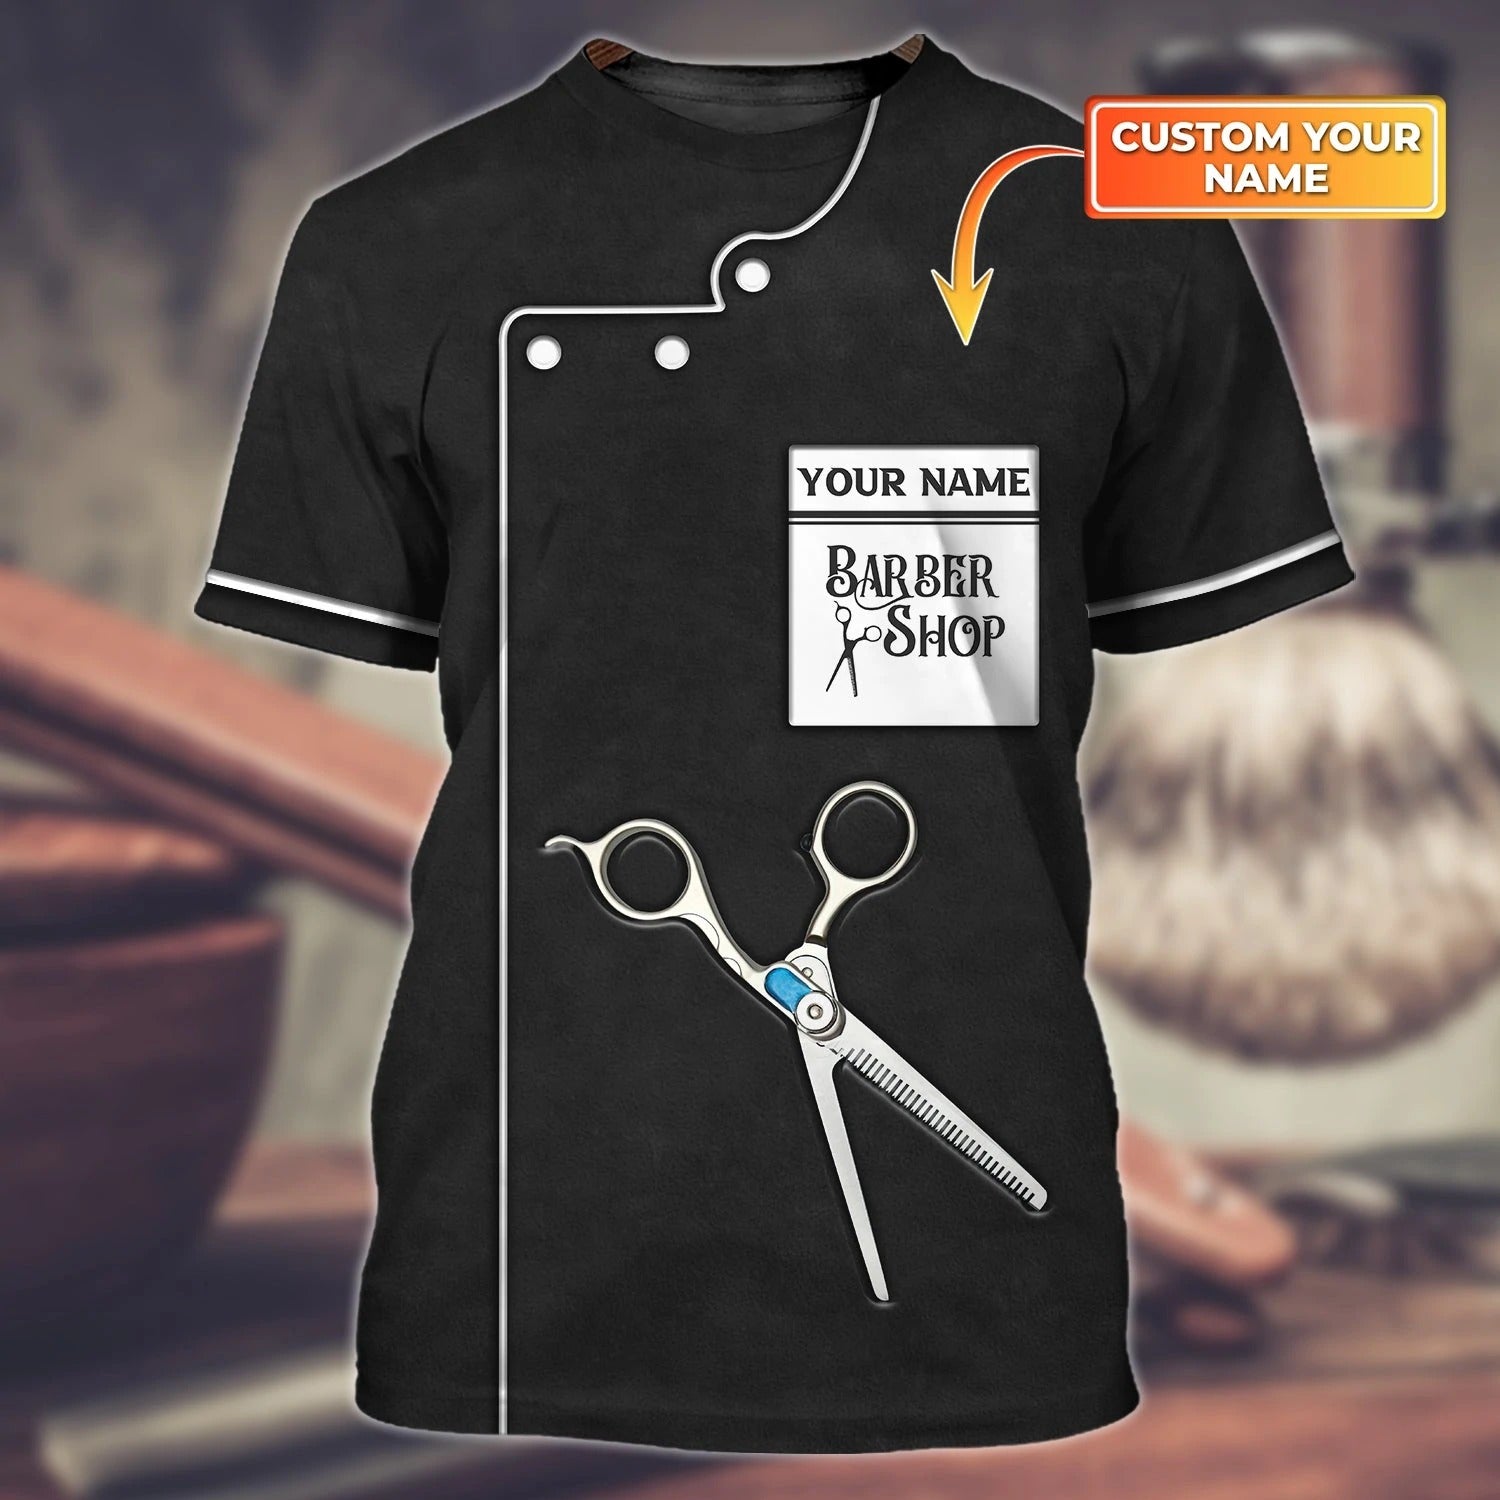 Personalized Authentic Barber Shirts/ New Barber Shop Gifts/ 3D T Shirt For Barber Man